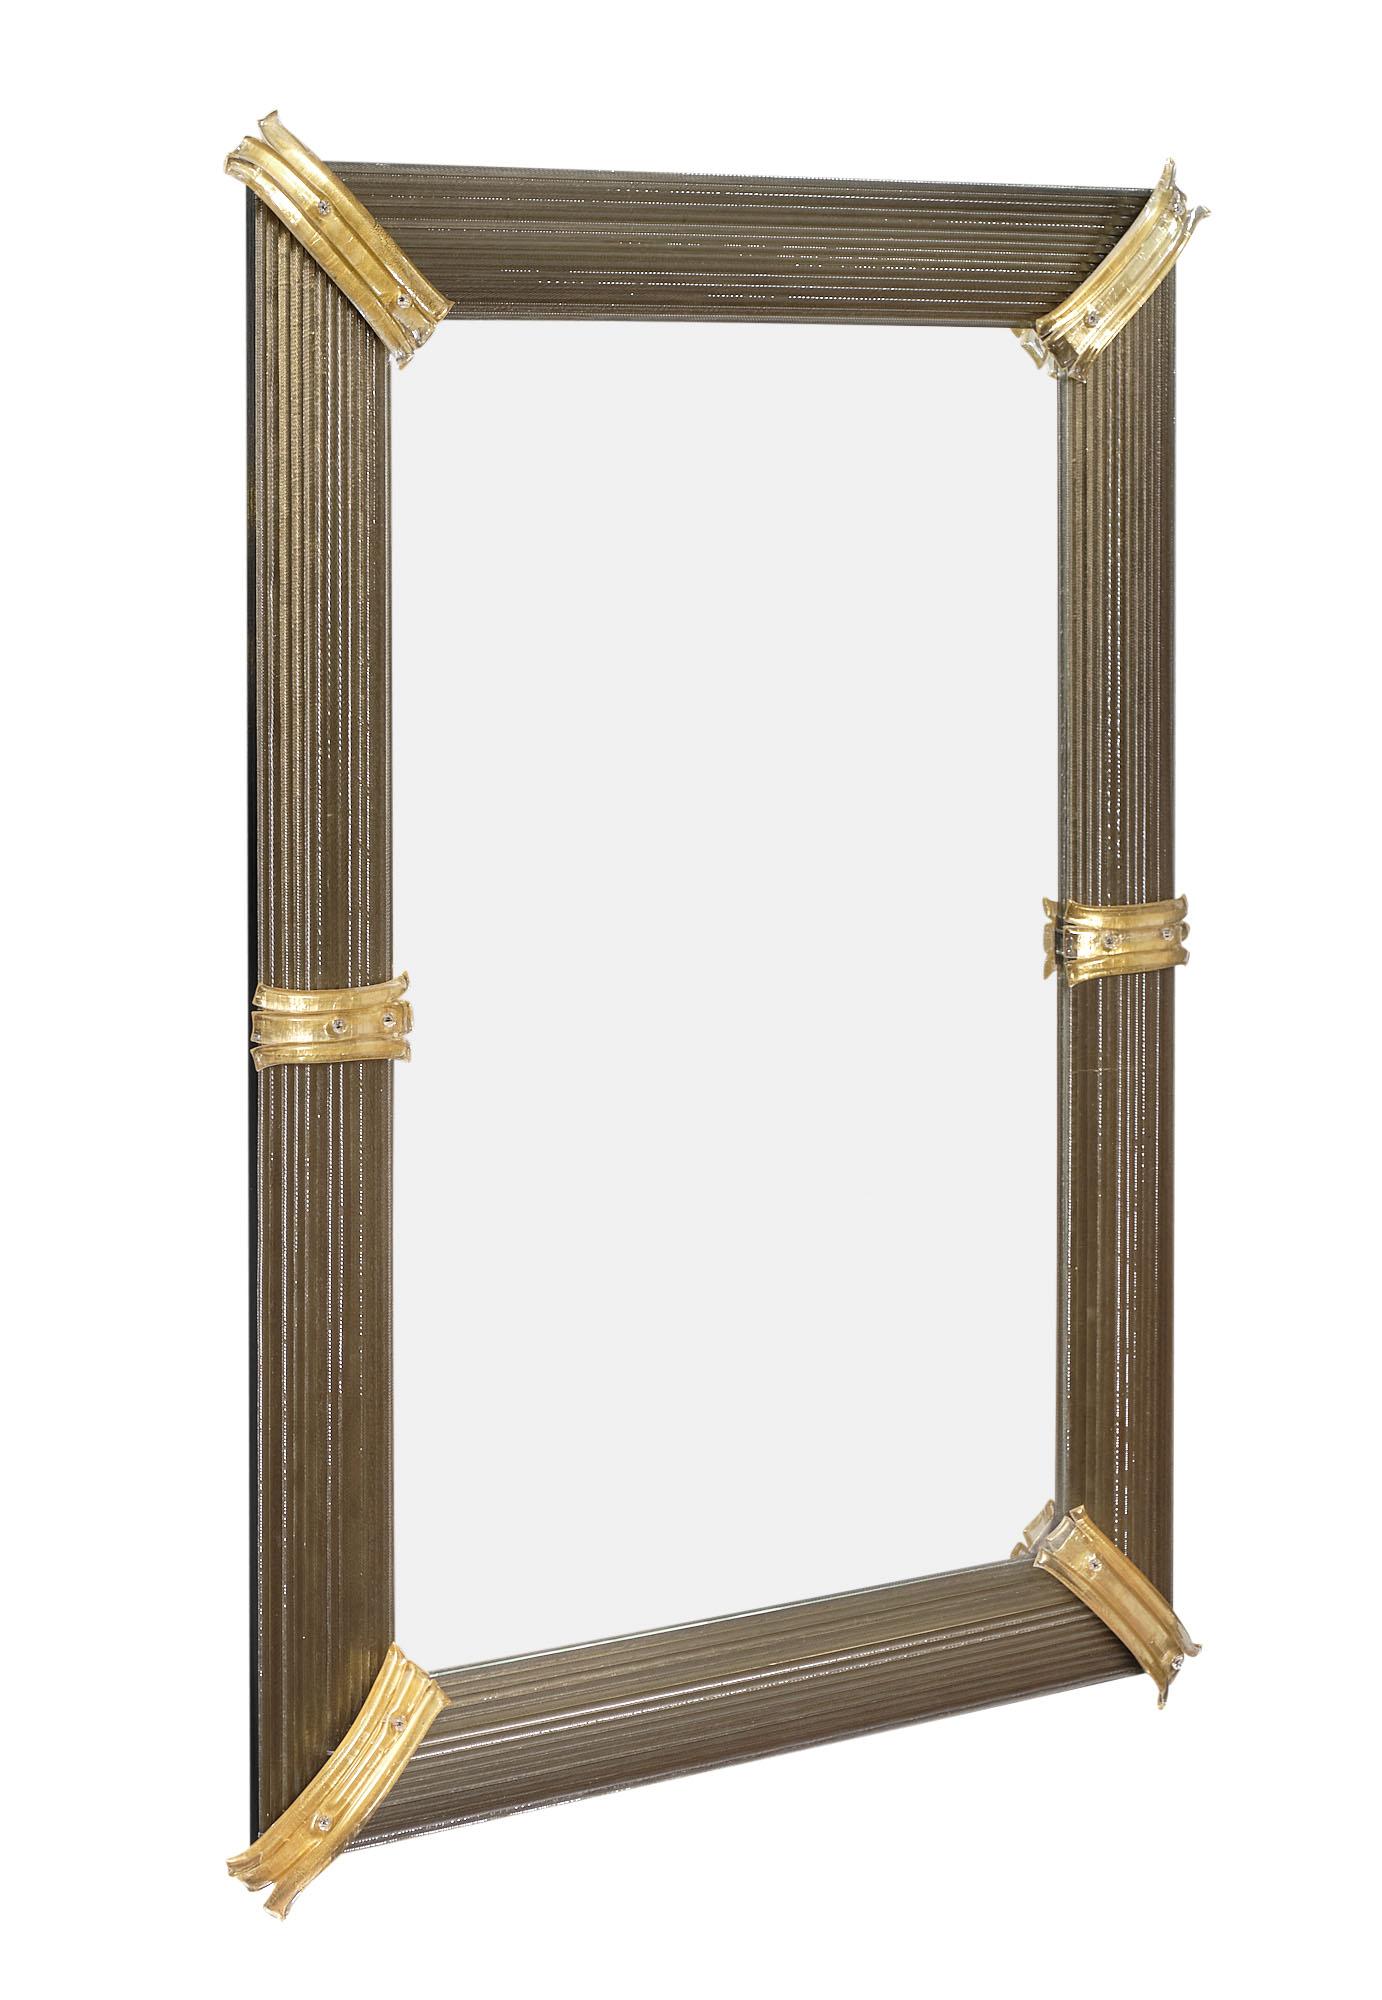 Pair of mirrors from Murano, Italy featuring multiple gray glass rods tied together to form a frame. Each corner is enhanced with a 24 carat gold fused piece of glass with texture.